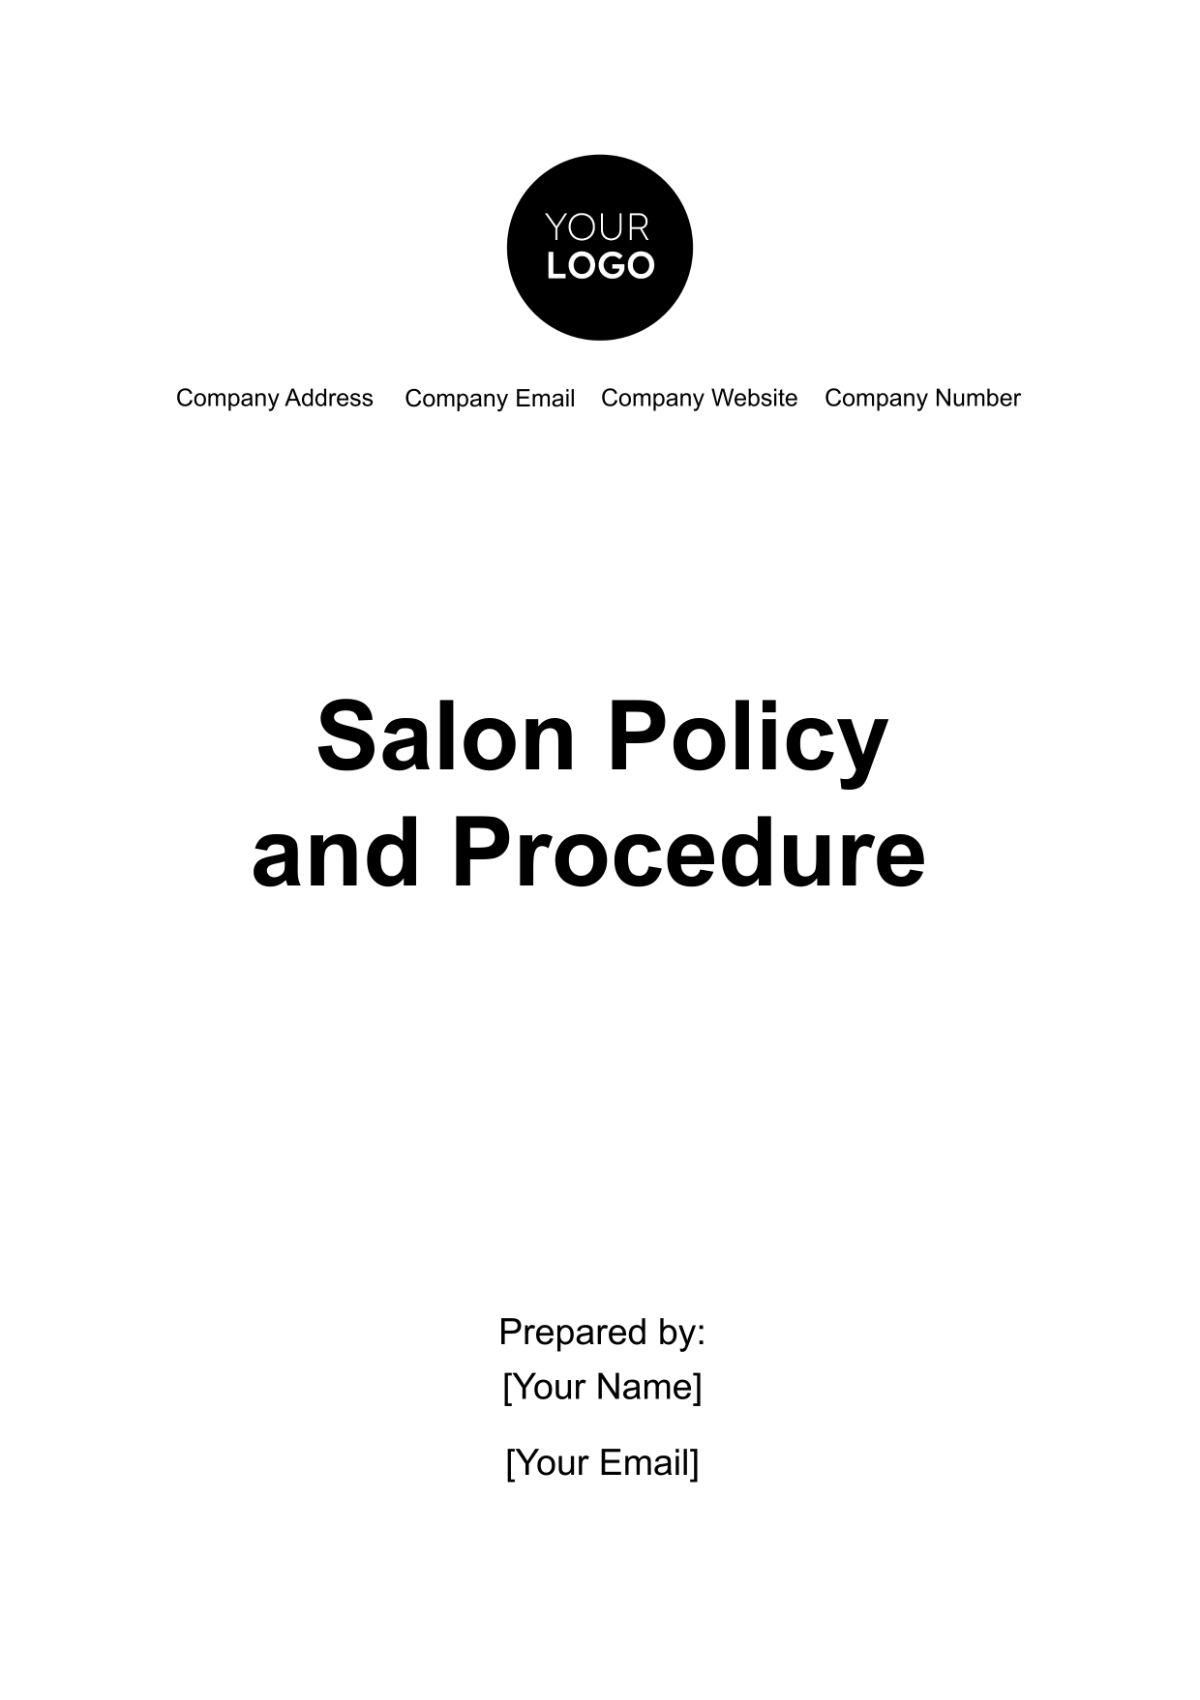 Free Salon Policy and Procedure Template